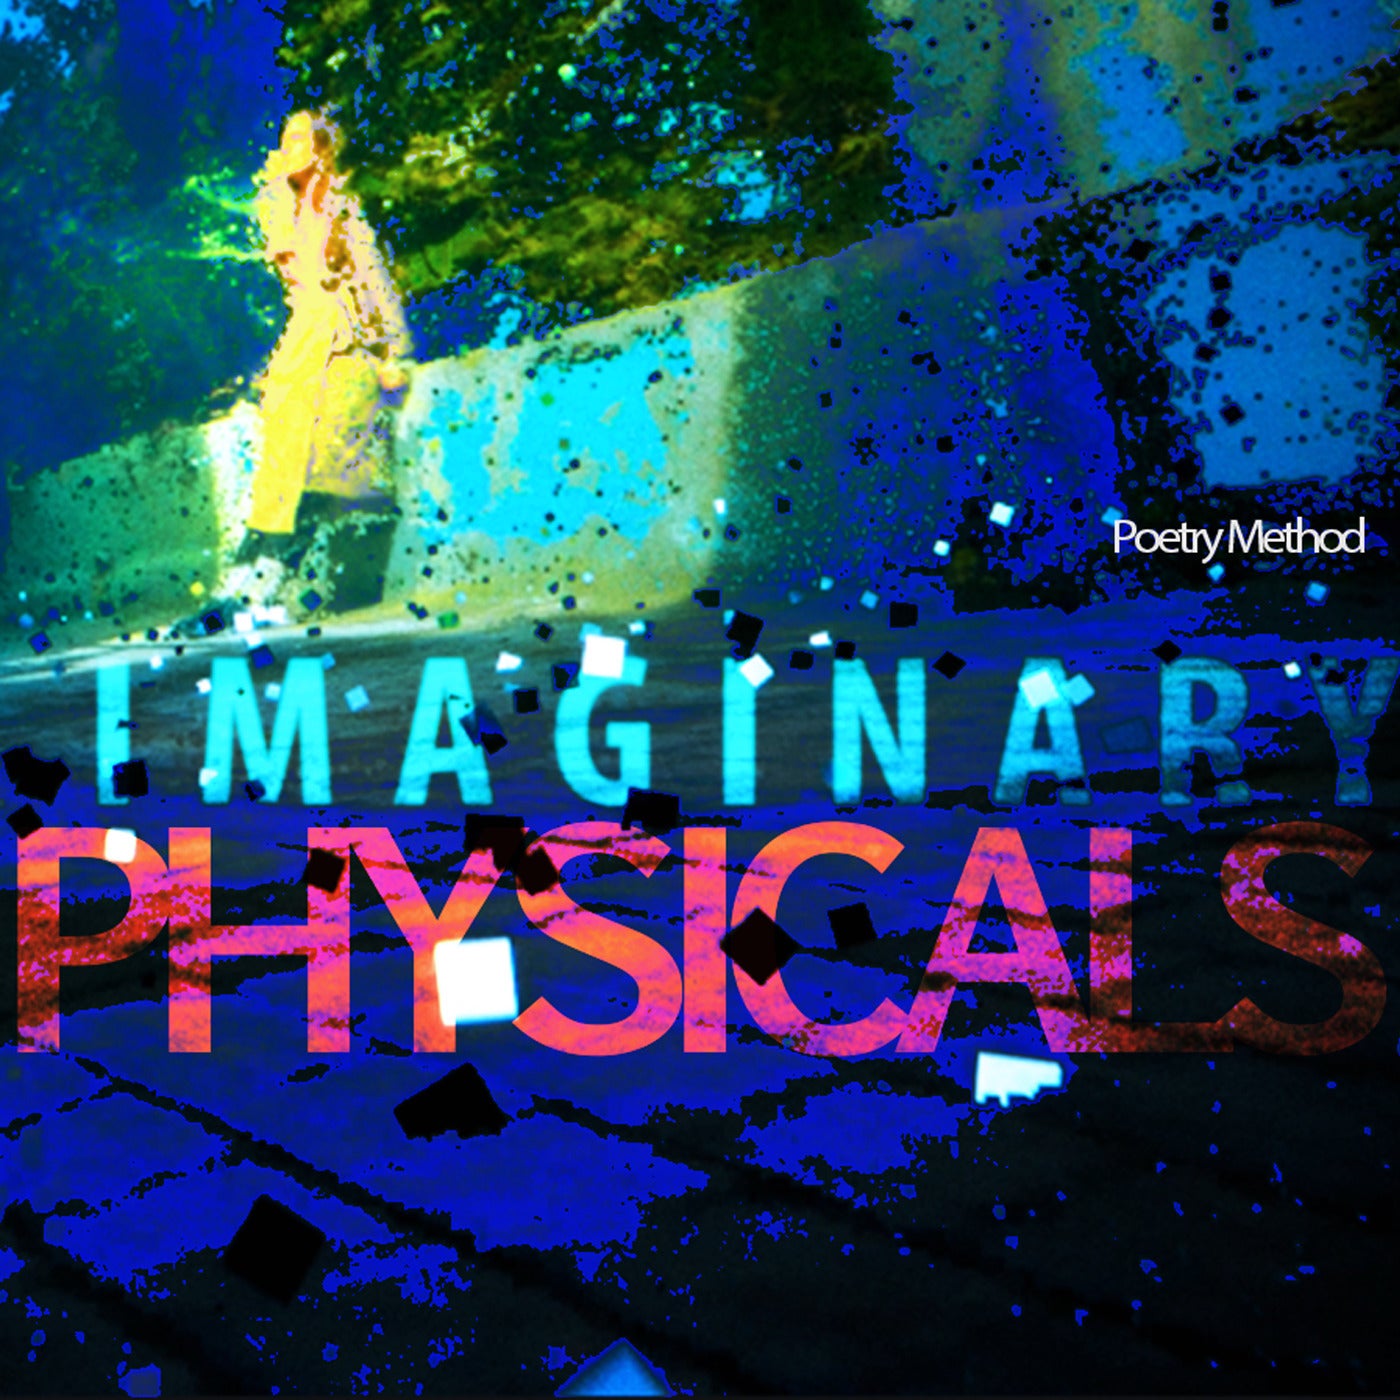 Imaginary Physicals